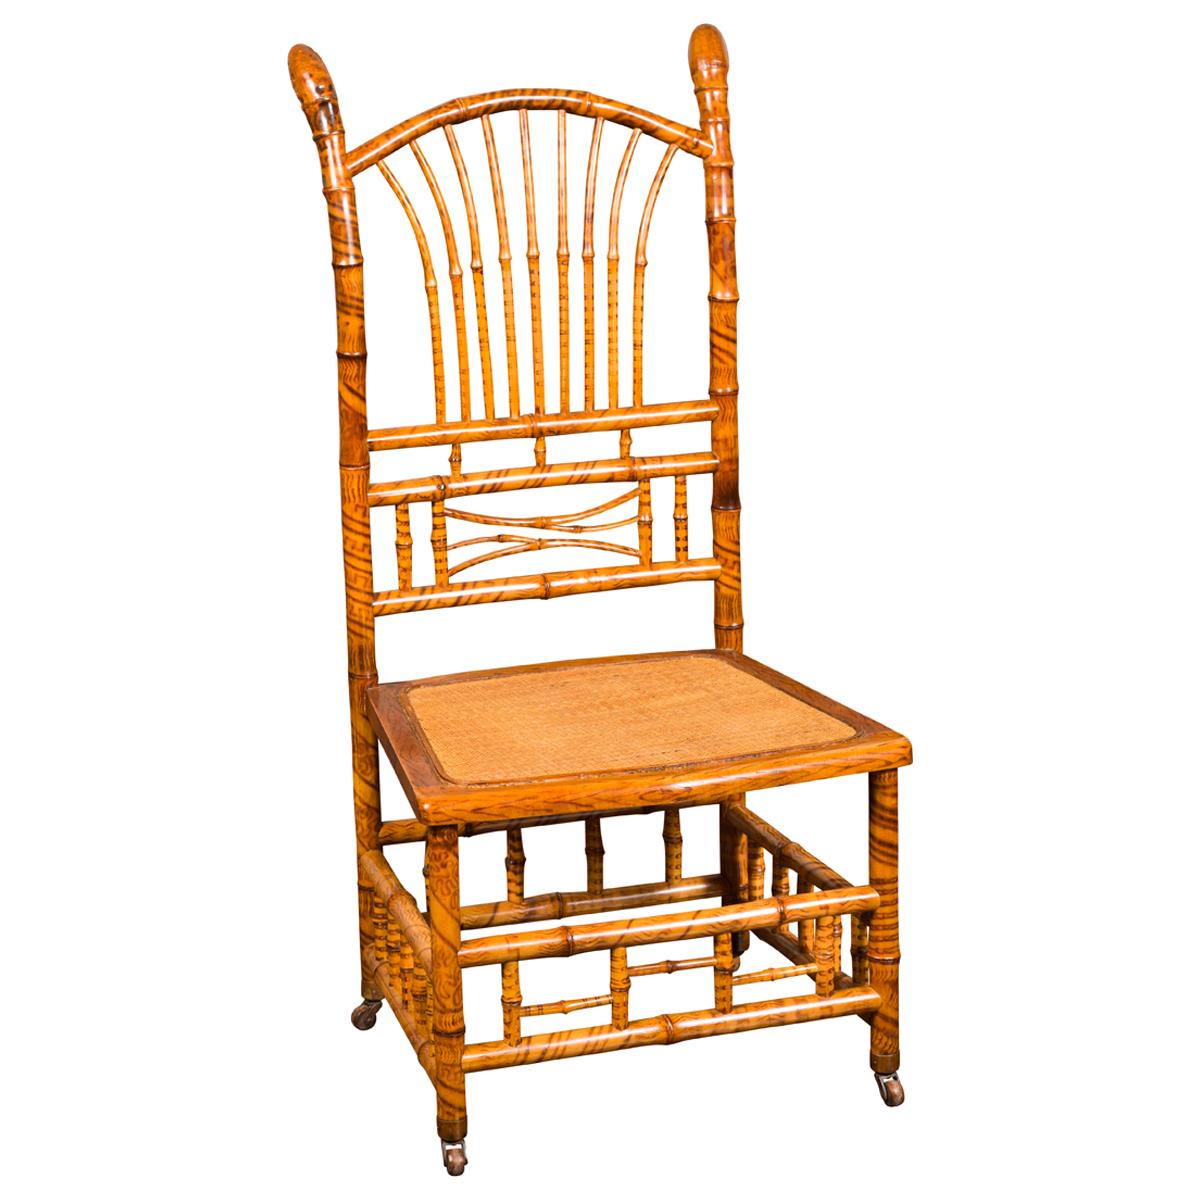 English 1890s Bamboo Slipper Chair with Fan Back, Rattan Seat and Casters